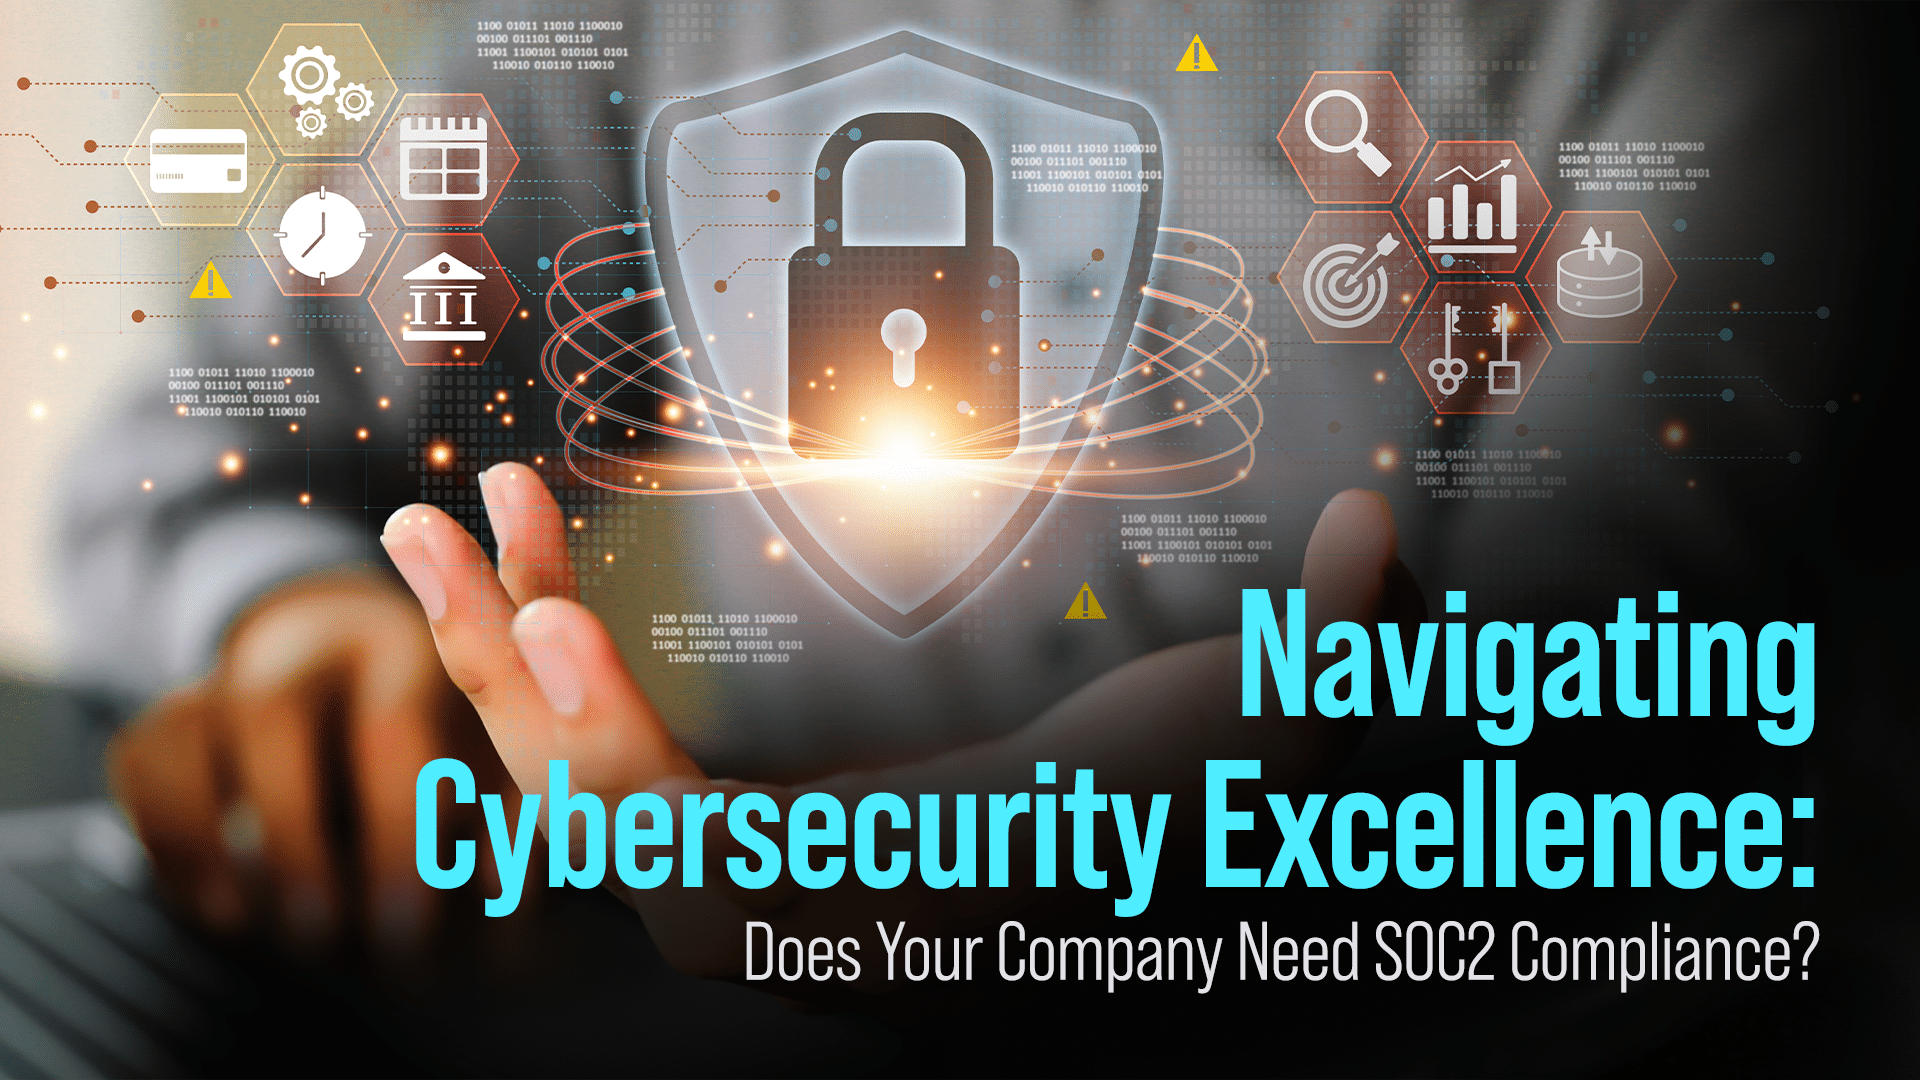 Navigating Cybersecurity Excellence: Does Your Company Need SOC2 Compliance?